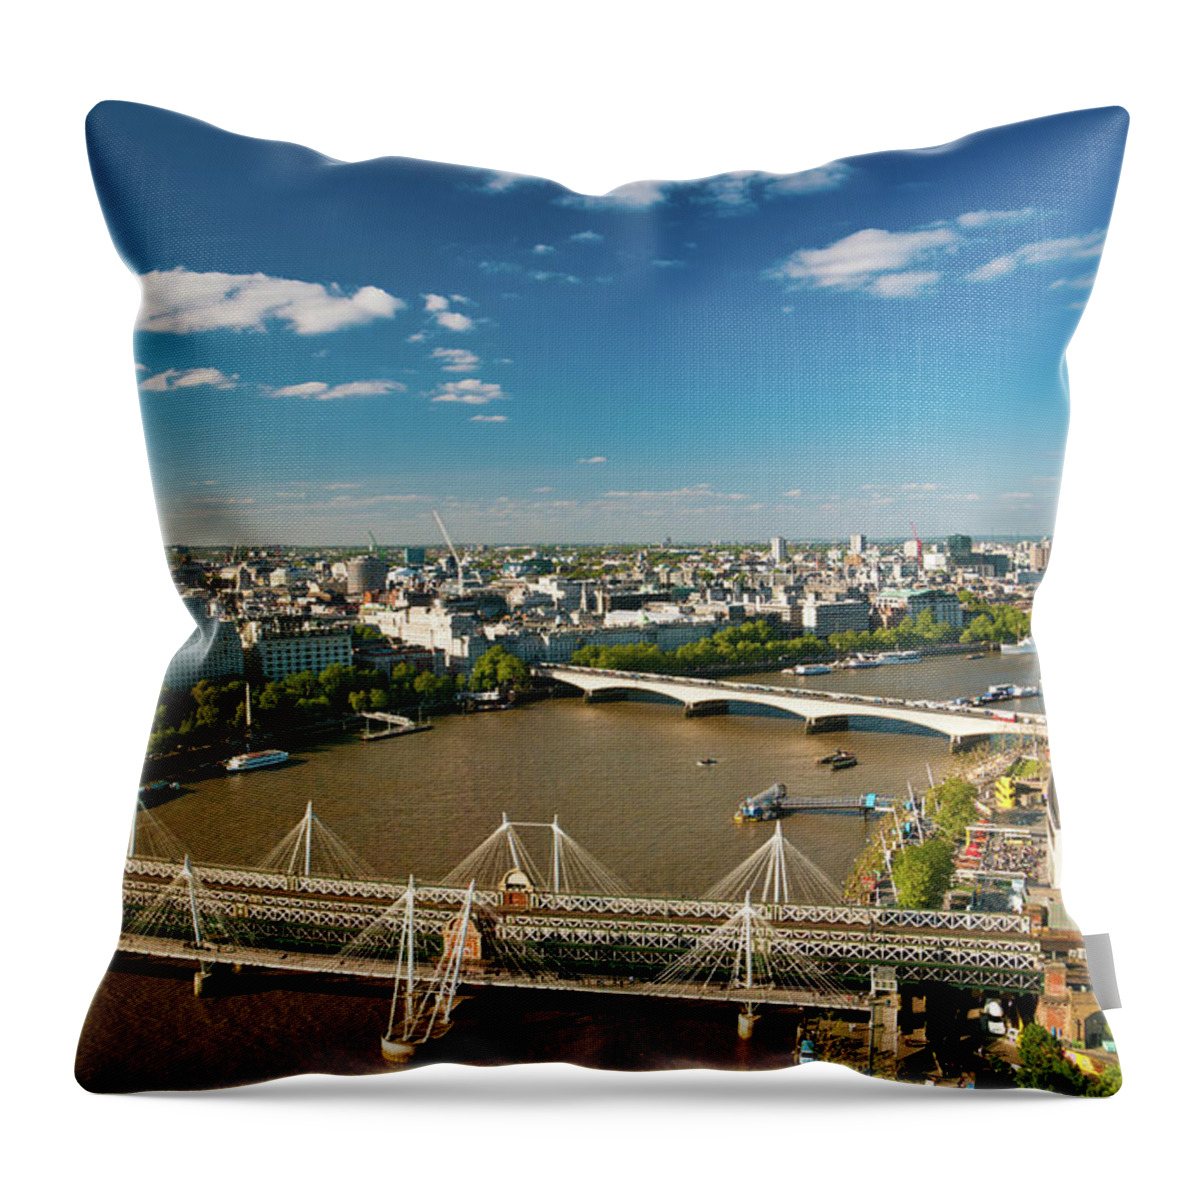 Built Structure Throw Pillow featuring the photograph Thames River Aerial View In London by Ferrantraite